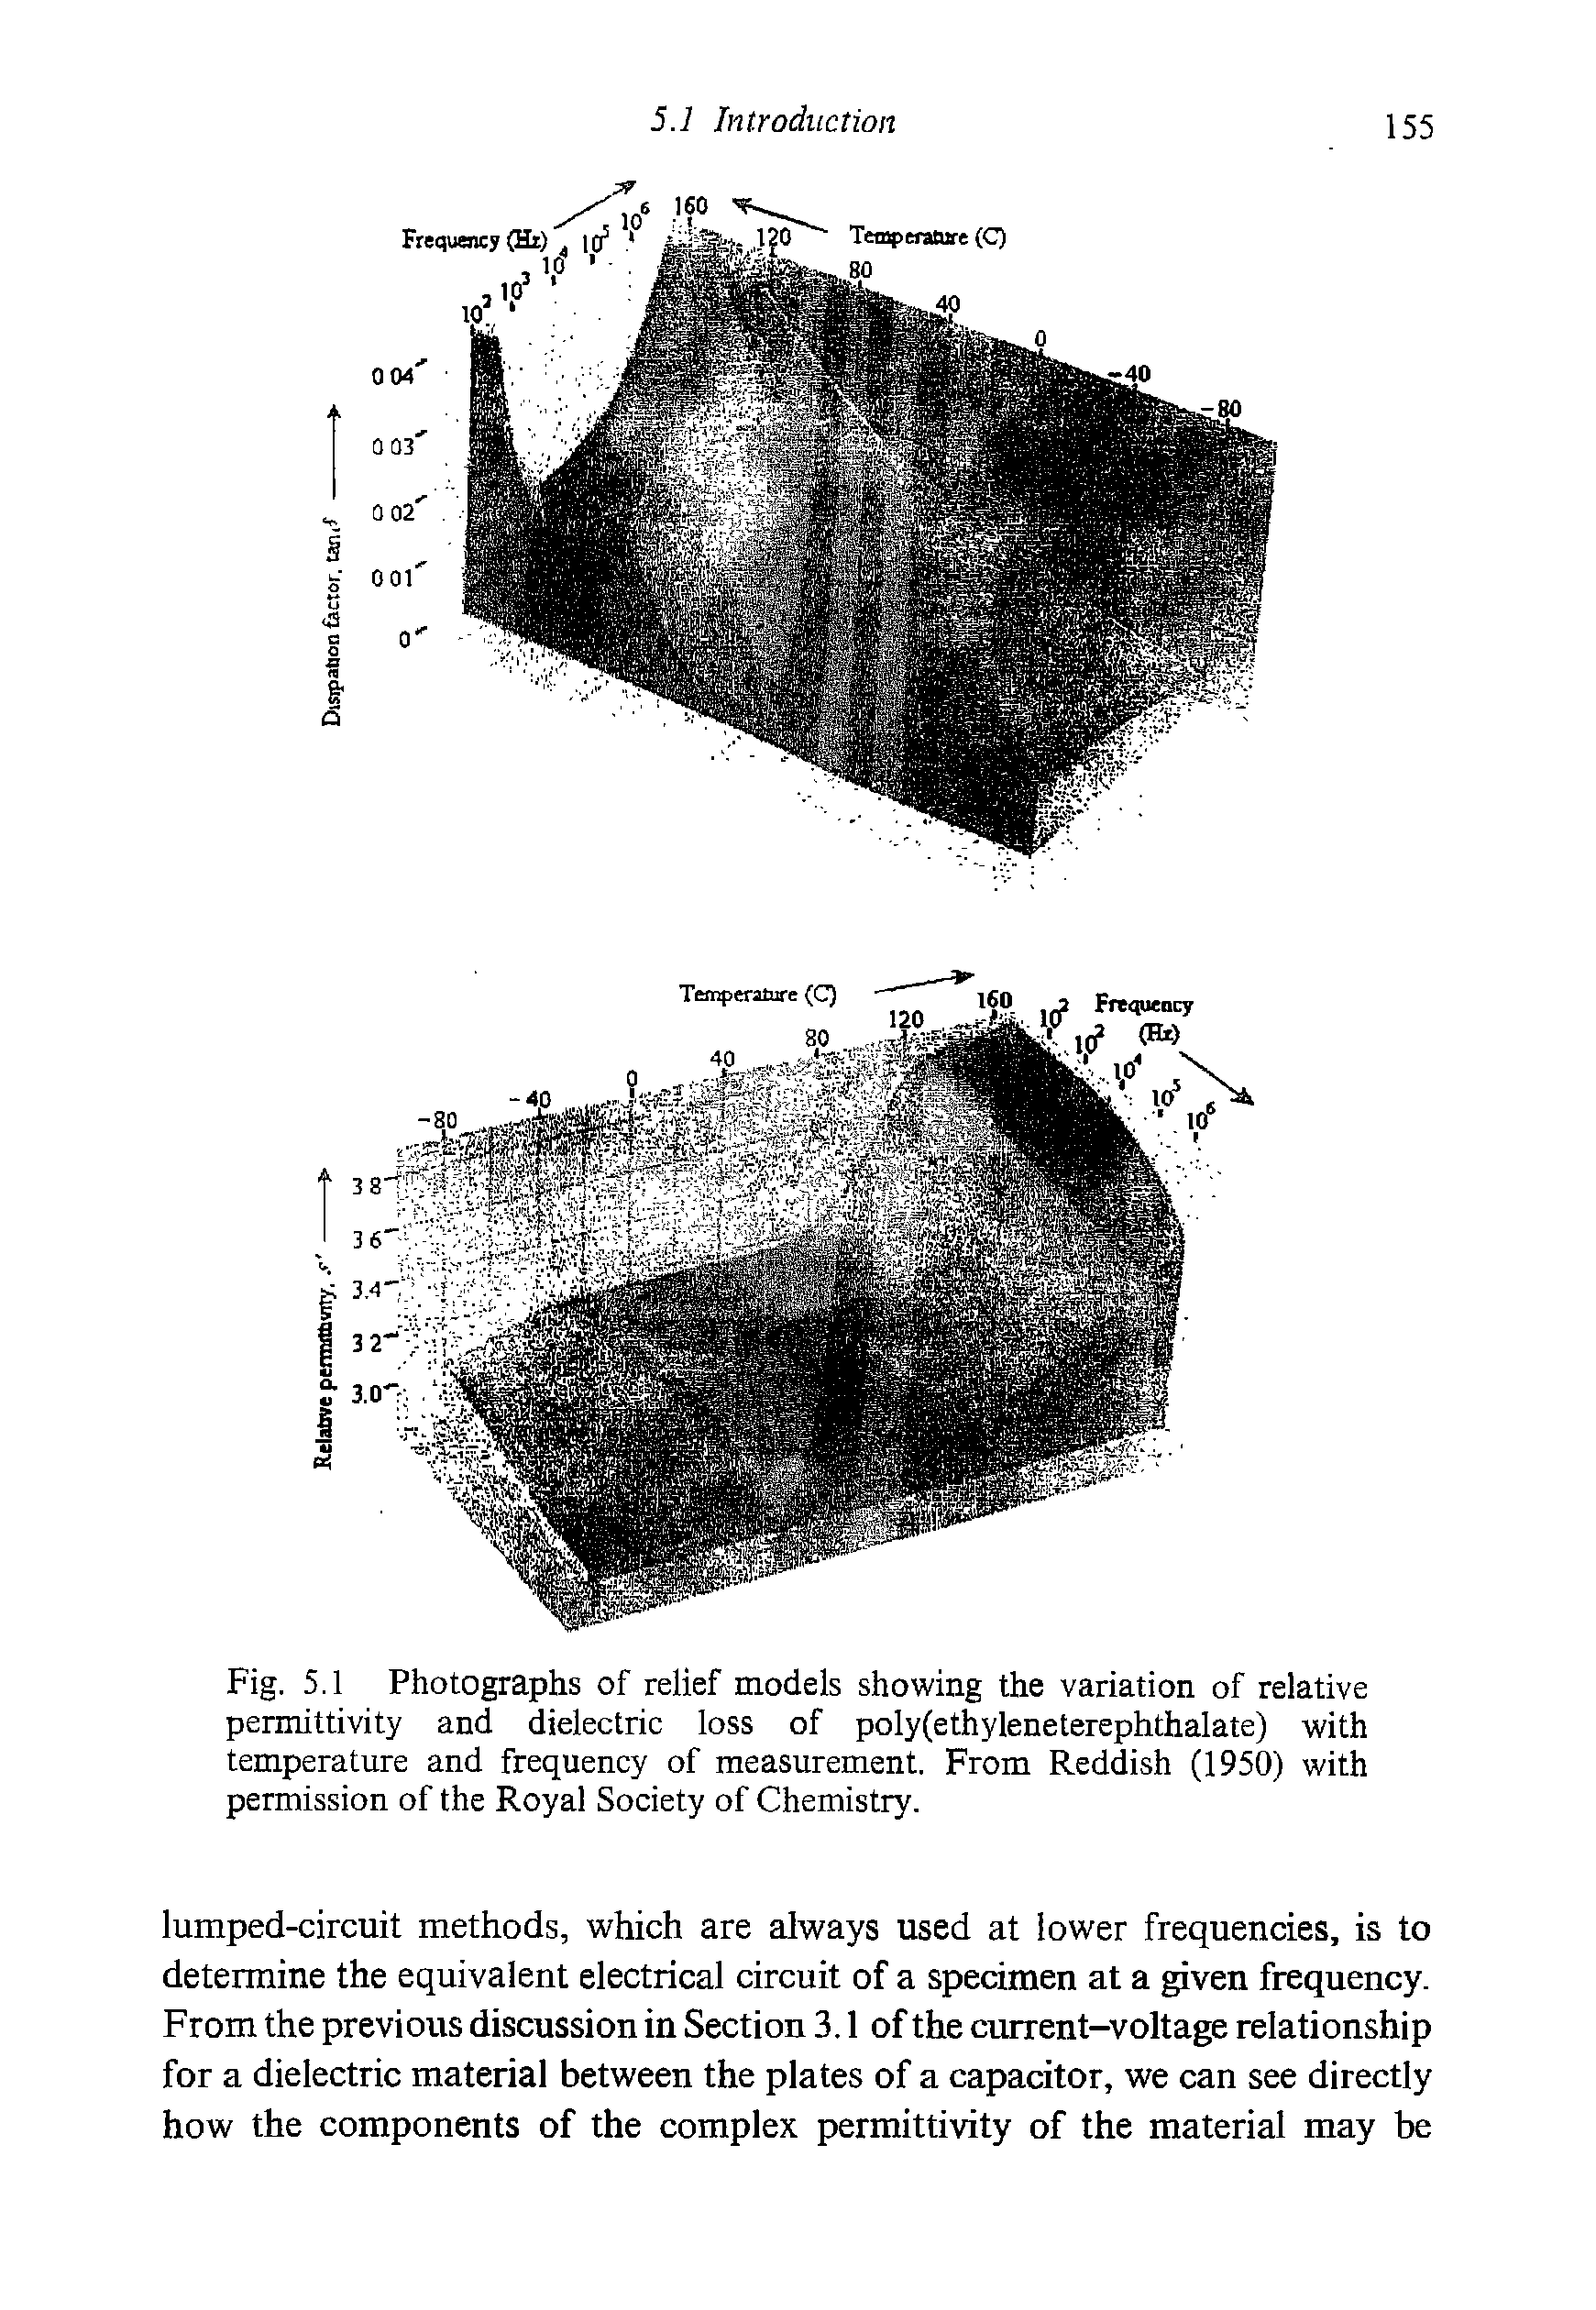 Fig. 5.1 Photographs of relief models showing the variation of relative permittivity and dielectric loss of poly(ethyleneterephthalate) with temperature and frequency of measurement. From Reddish (1950) with permission of the Royal Society of Chemistry.